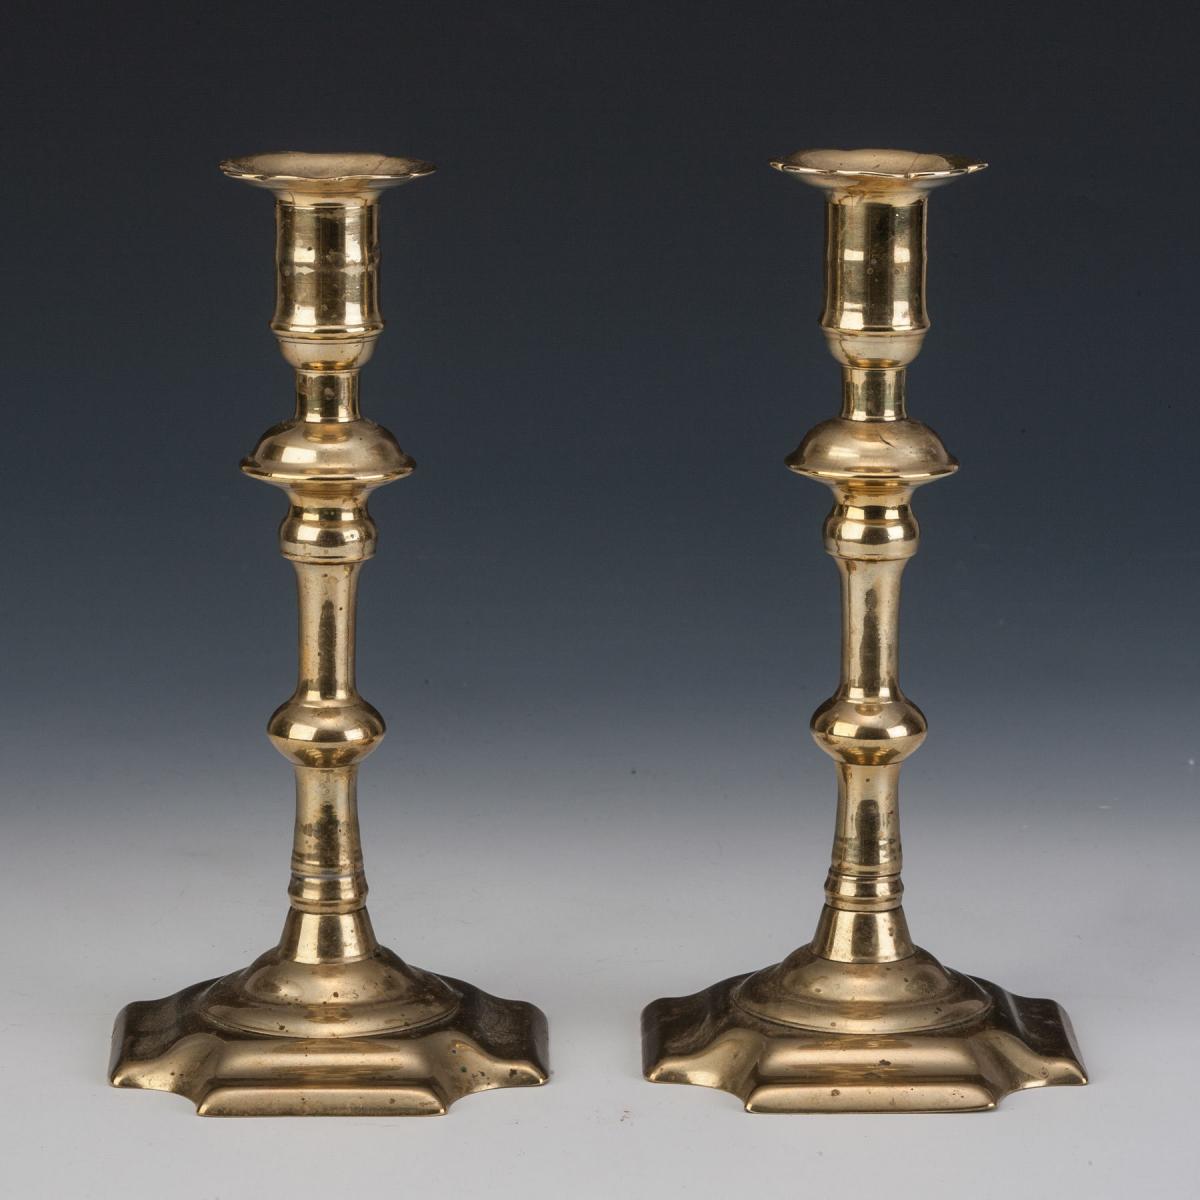 A Pair of George Grove Candlesticks